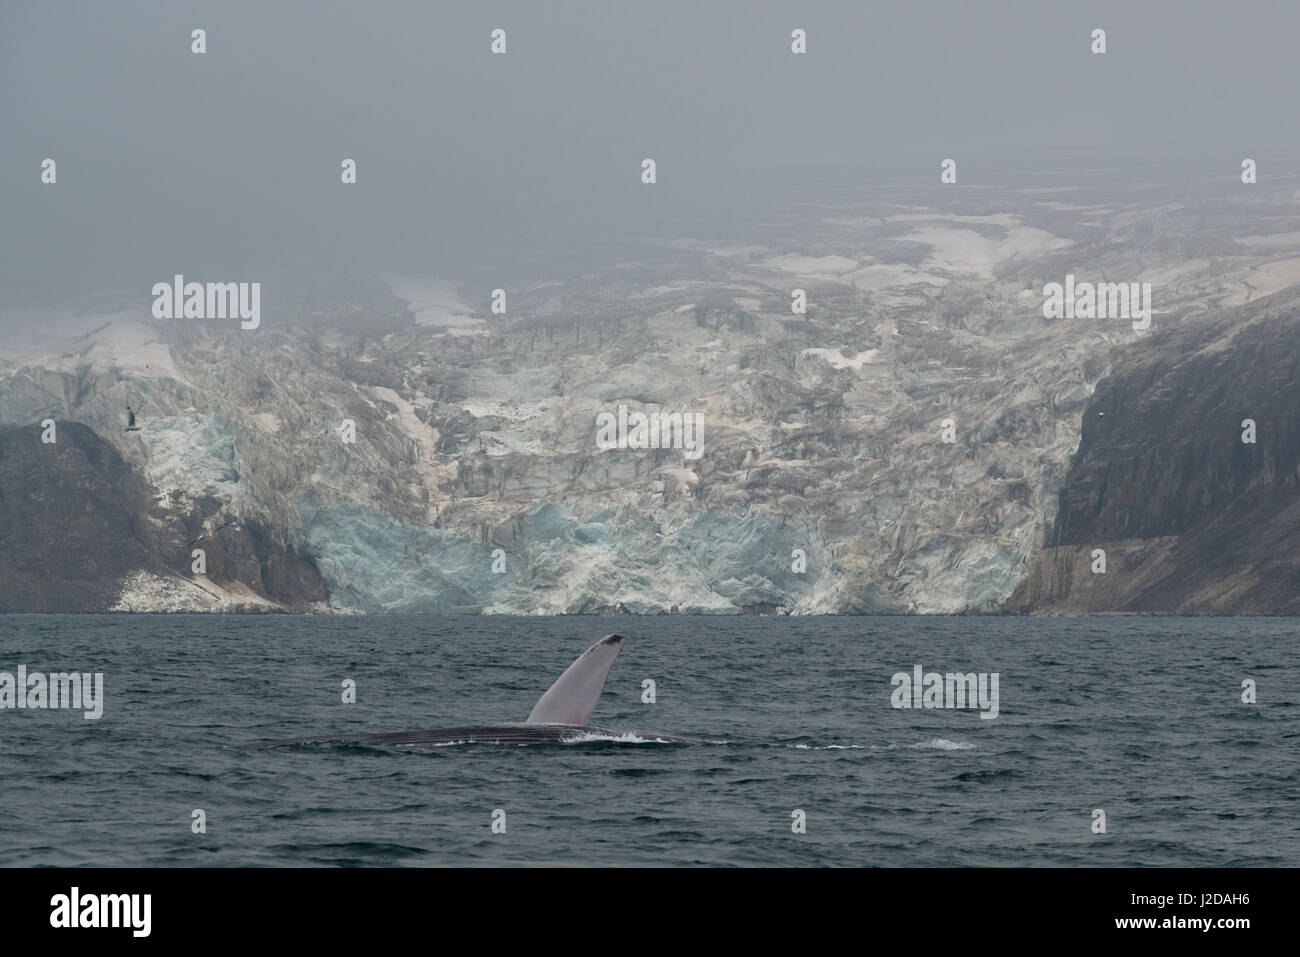 When we sailed into the Hinlopenstreet, this blue whale swam with one of its flippers high, in front of a beautiful glacier. Stock Photo